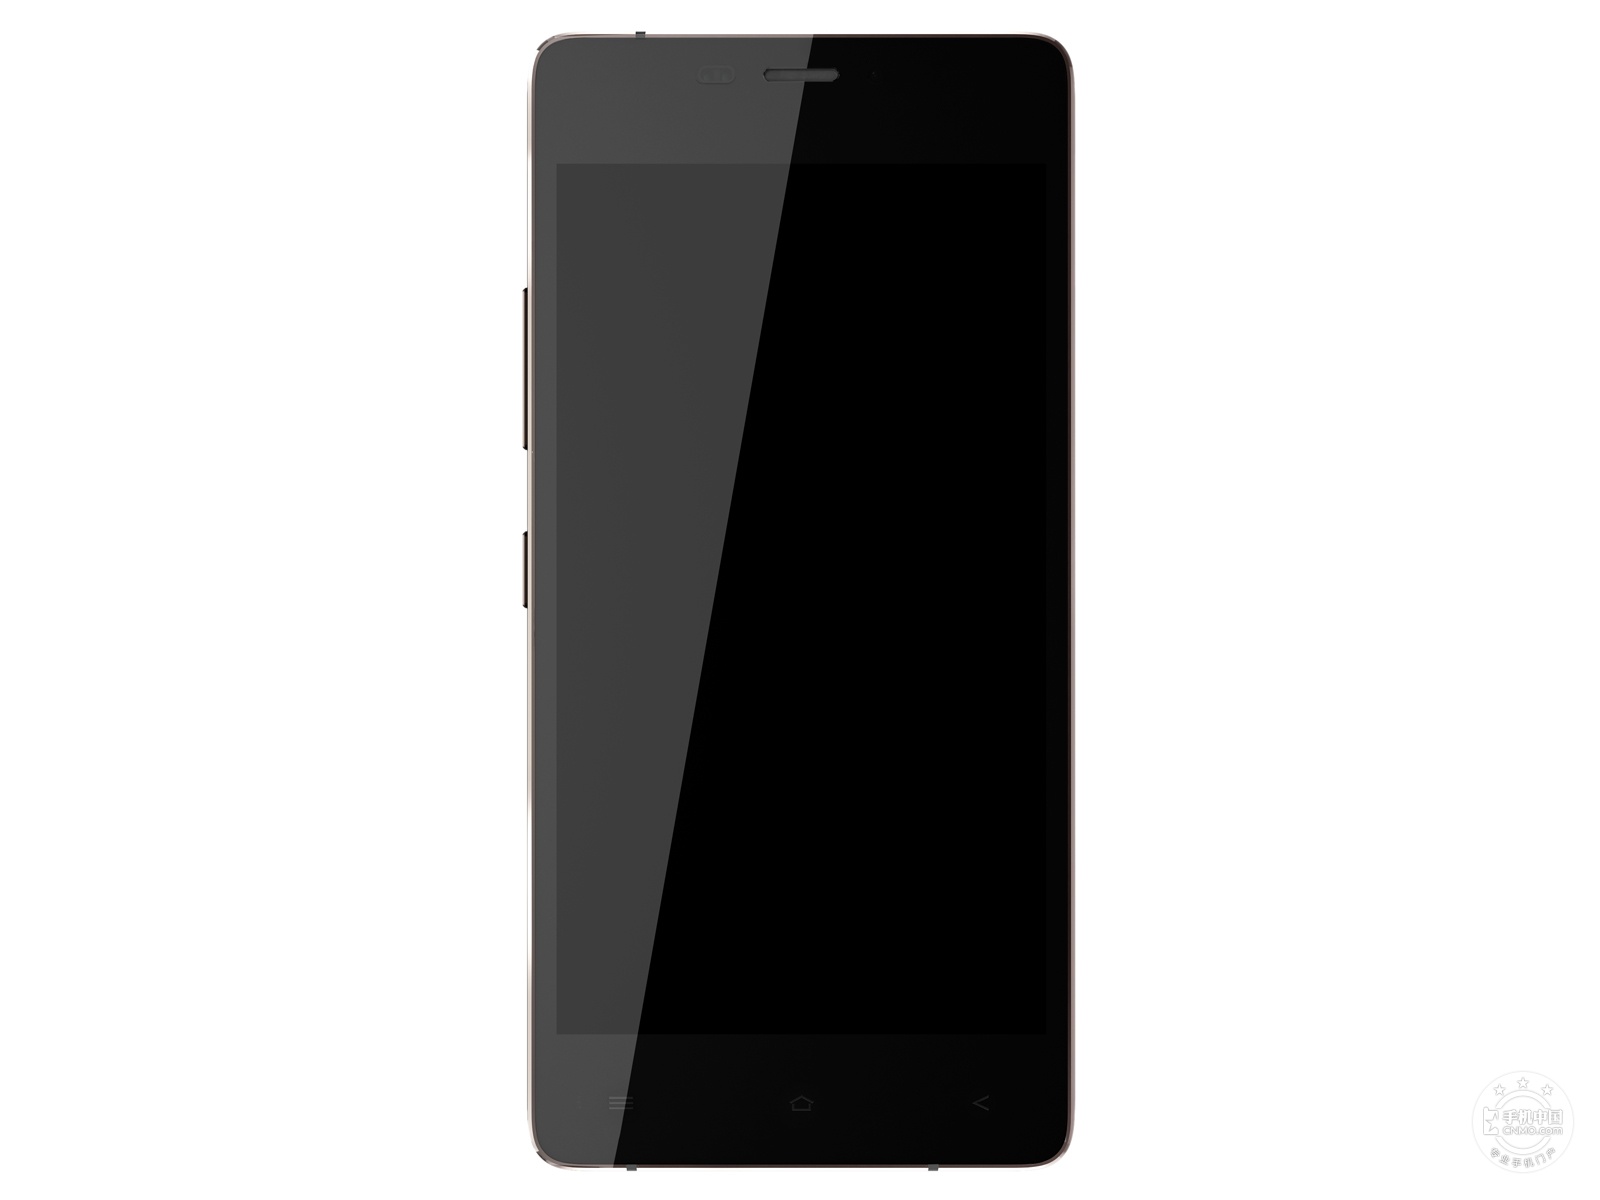 Gionee-Elife-S5.1-10